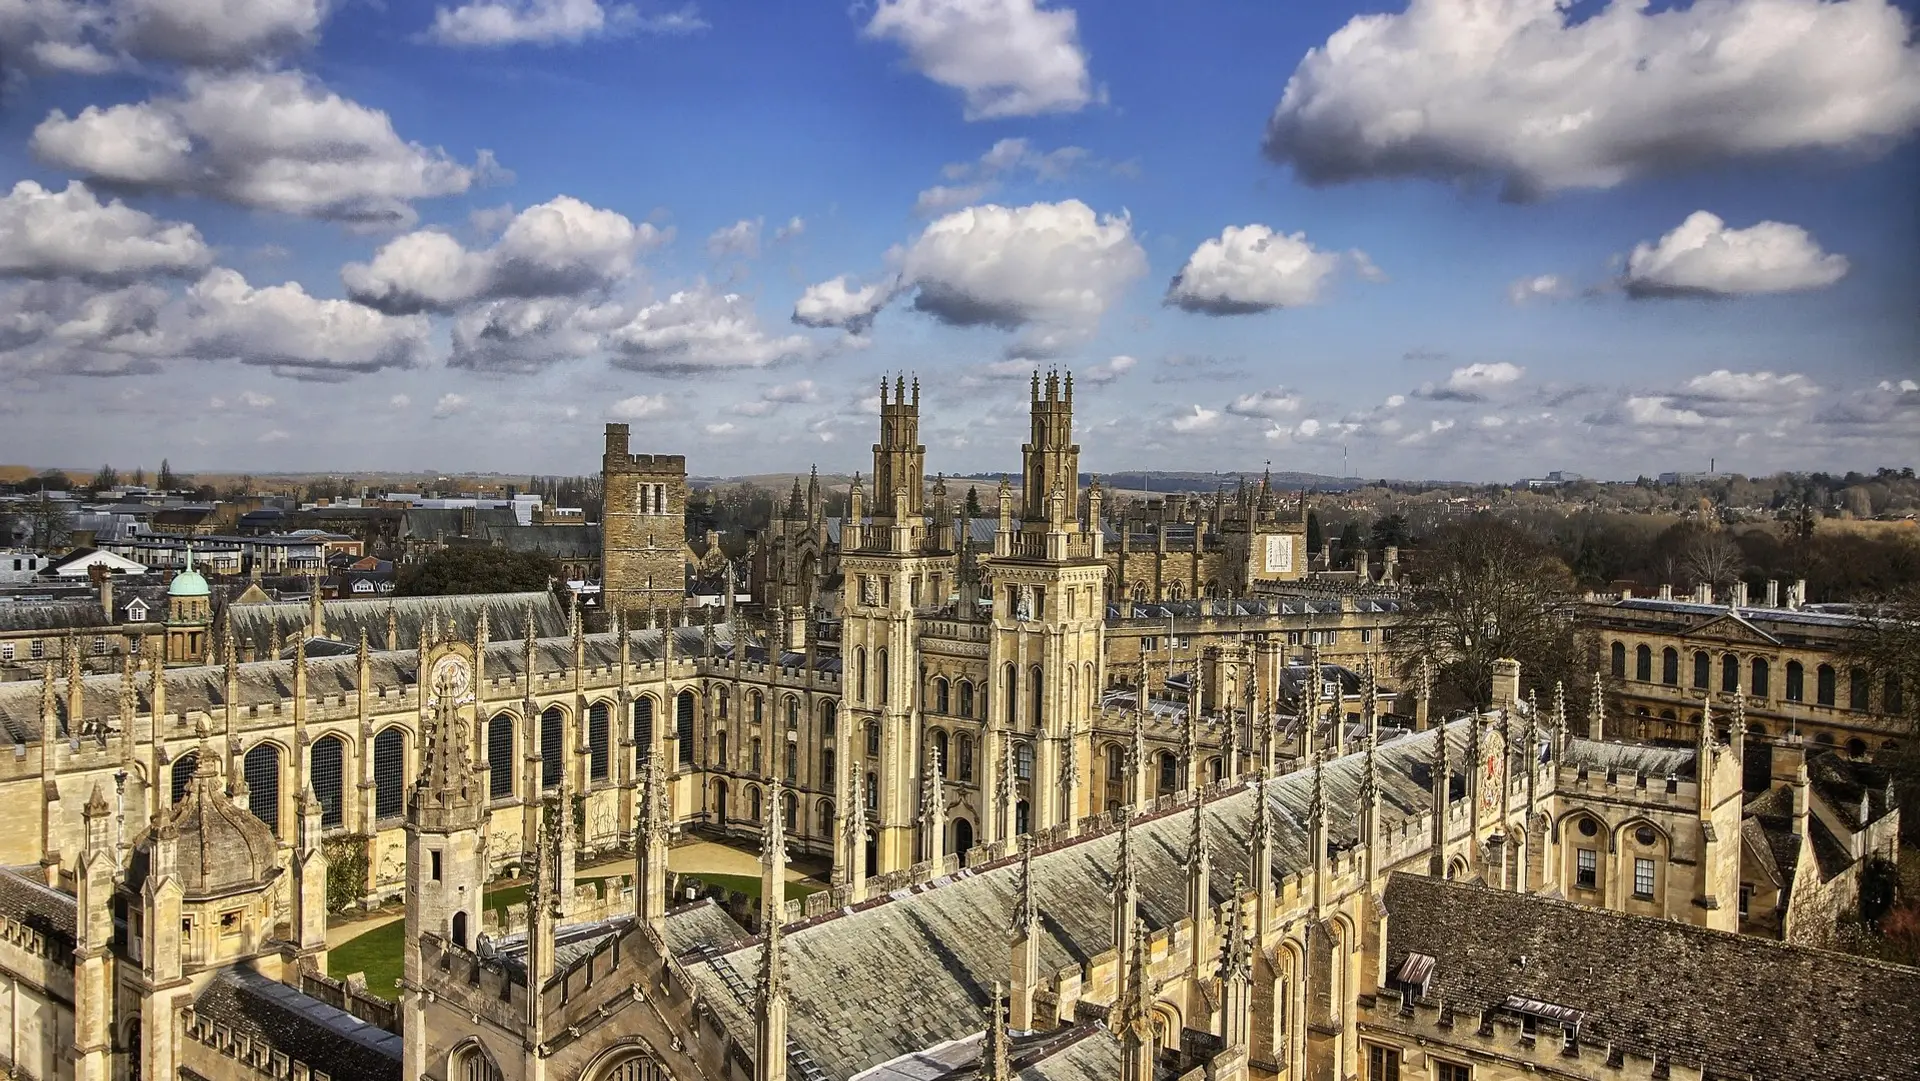 an overview of Oxford